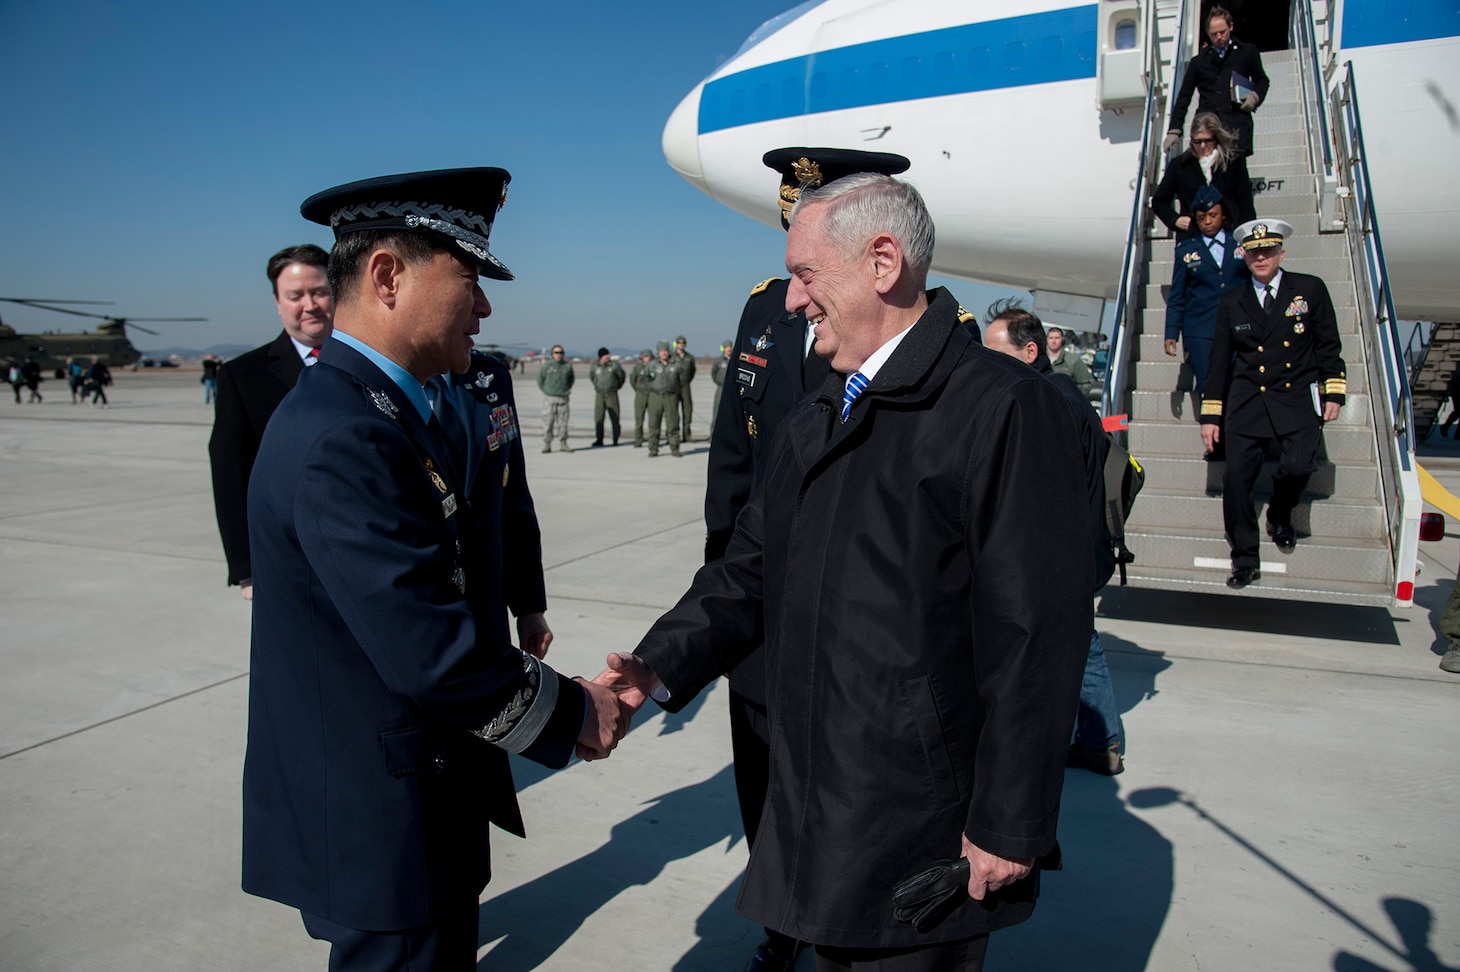 Defense Secretary Jim Mattis greets Republic of Korea Air Force (ROKAF) Lt. Gen. Won, In-Choul, ROKAF Operations Command commander, as he arrives at Osan Air Base, Feb. 2, 2017.  Mattis’ visit to the ROK, the first such visit in his tenure as secretary of defense, comes in light of a year of strong provocations from North Korea, affirming the ironclad commitment the U.S. has in strengthening its robust alliance with the ROK.